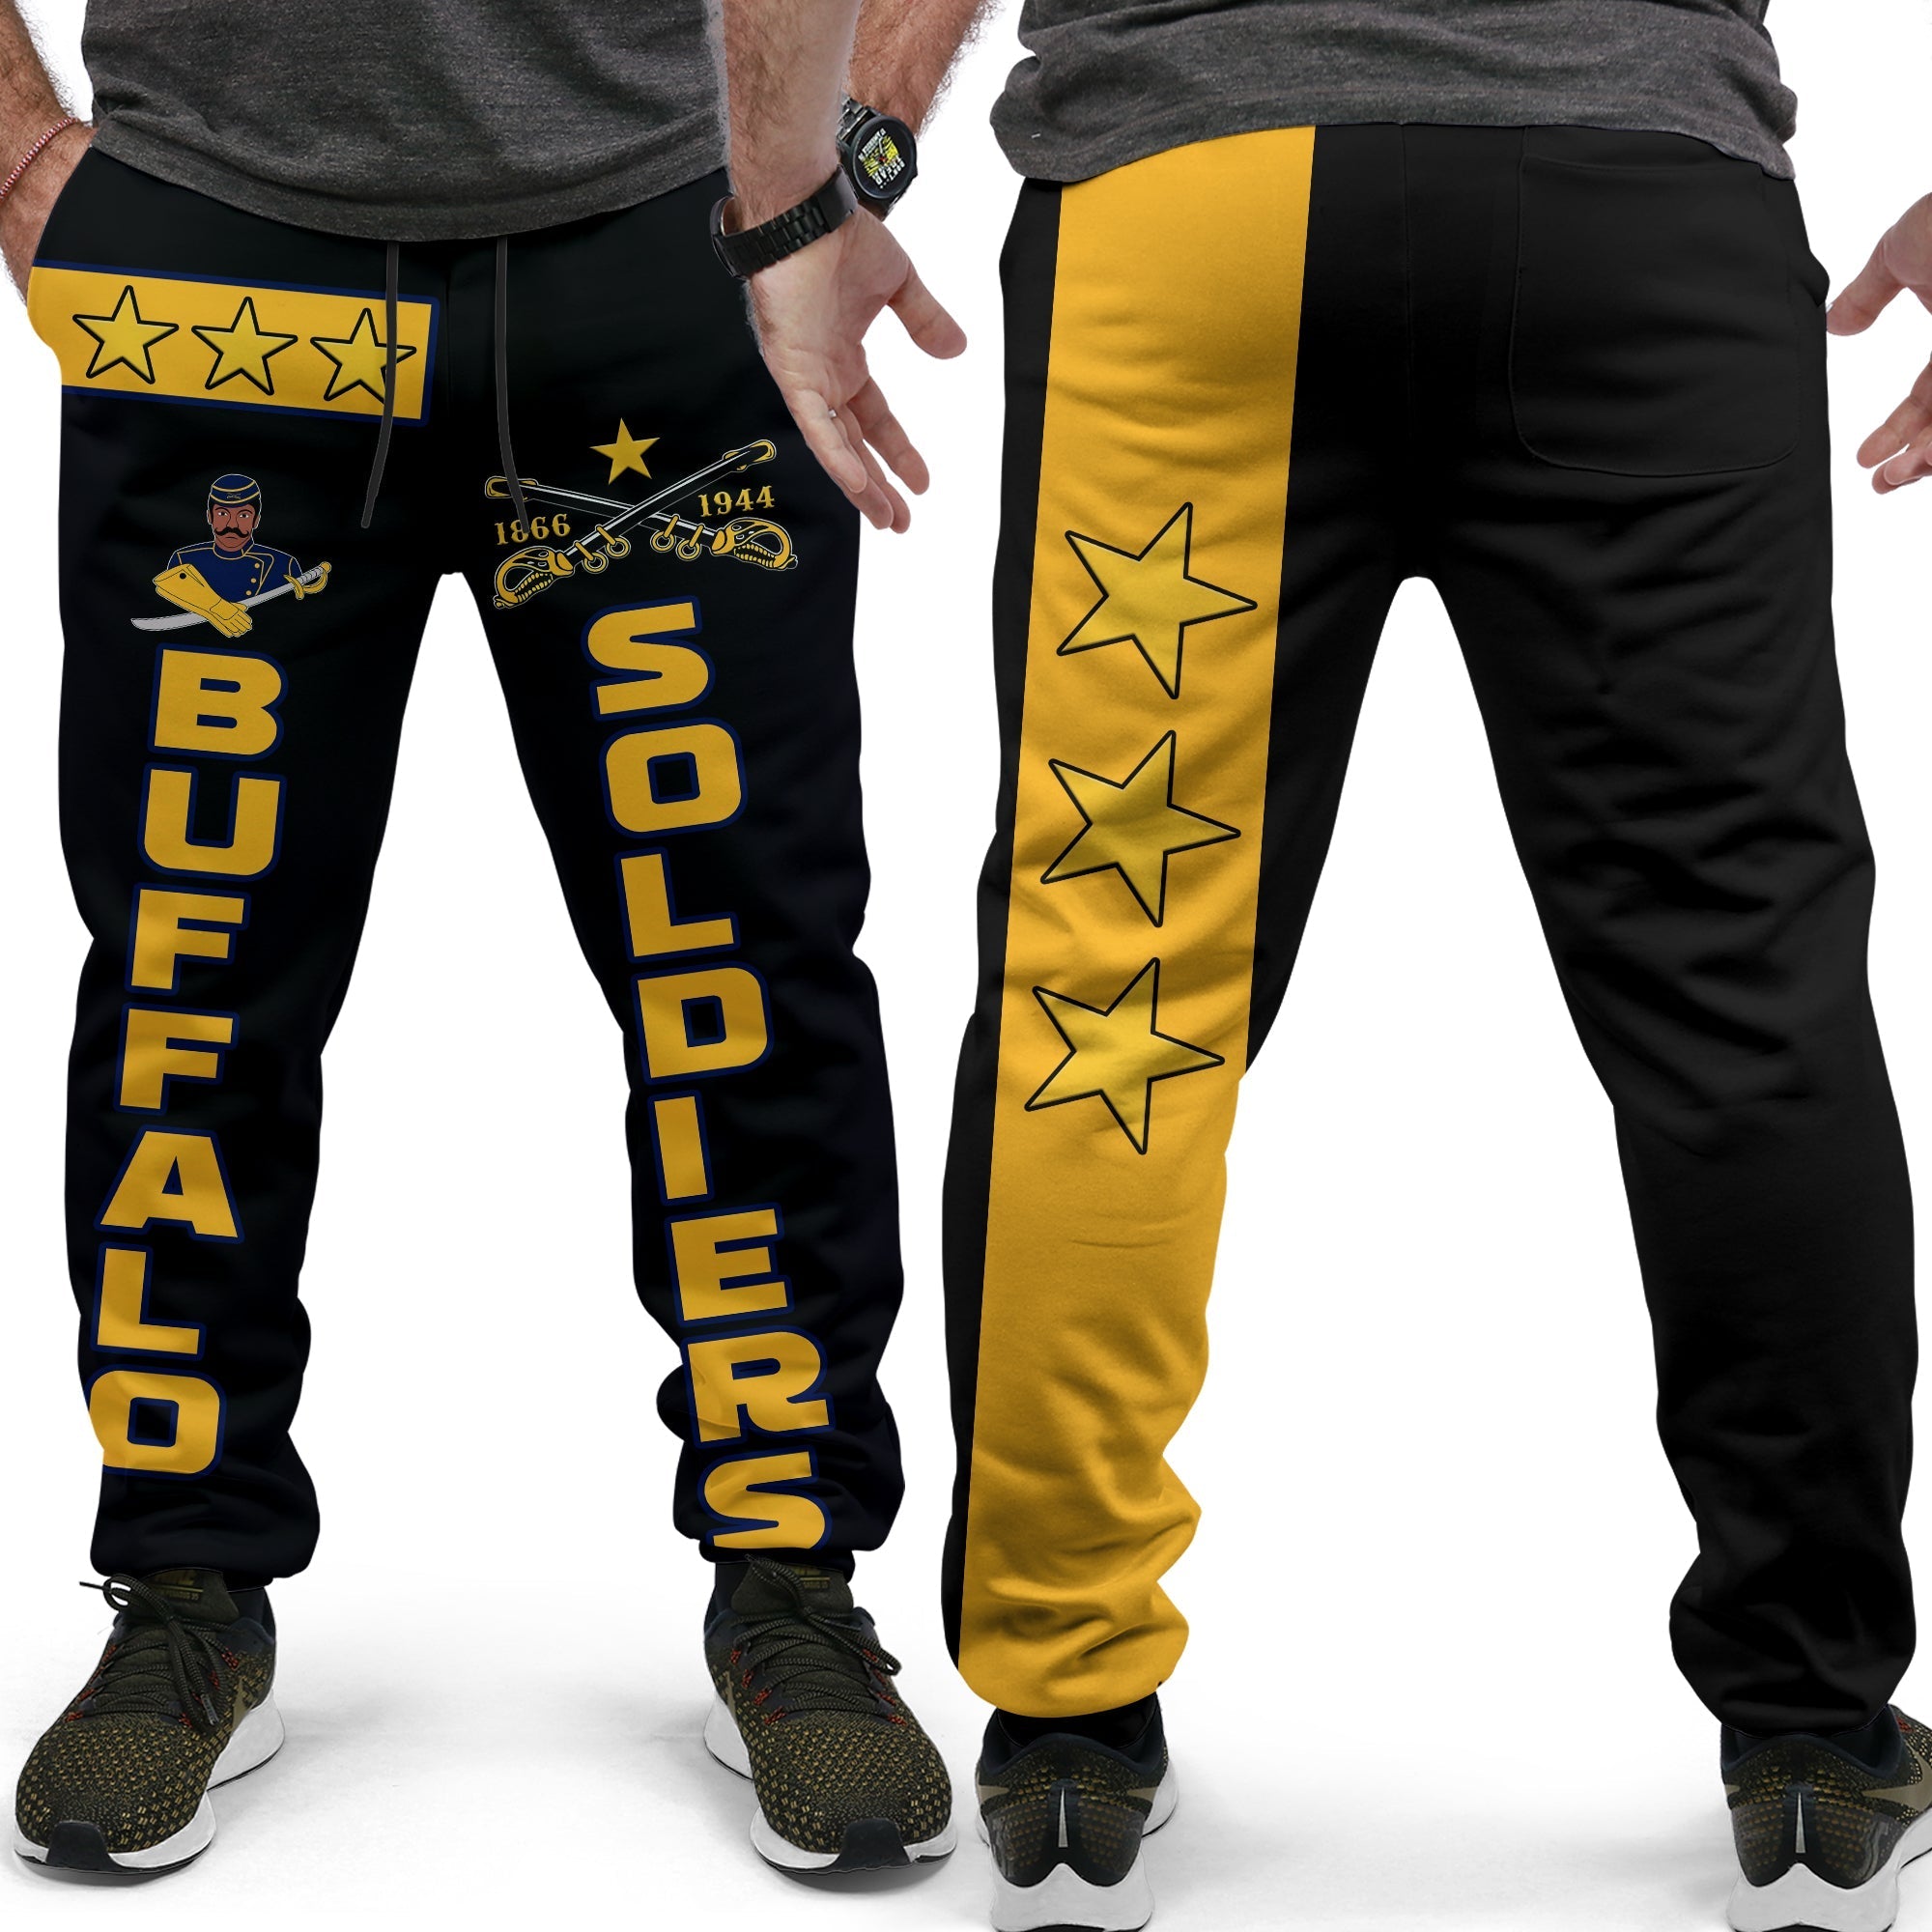 buffalo-soldiers-jogger-pants-bsmc-club-adore-motorcycle